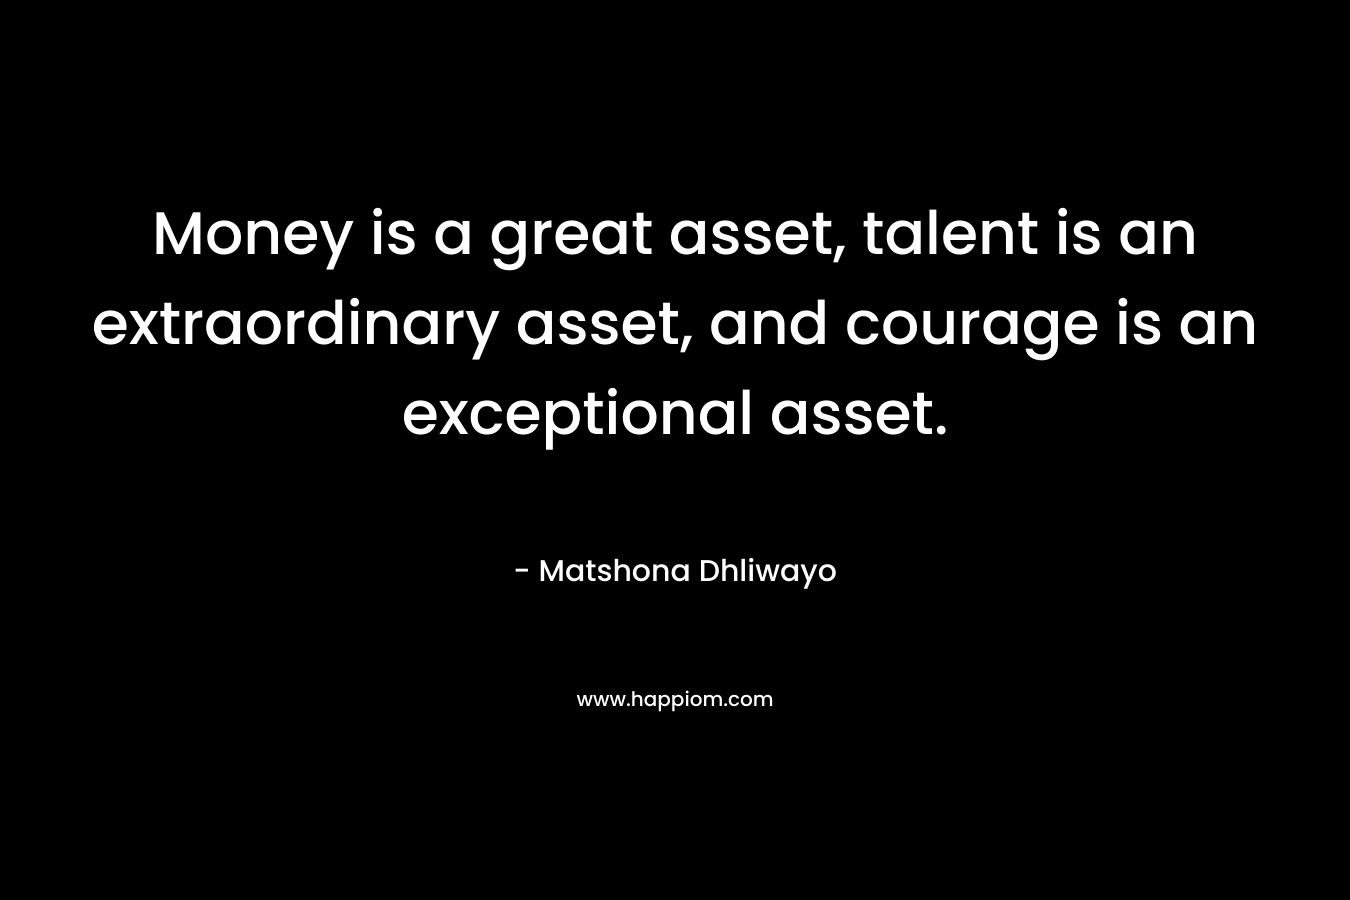 Money is a great asset, talent is an extraordinary asset, and courage is an exceptional asset.